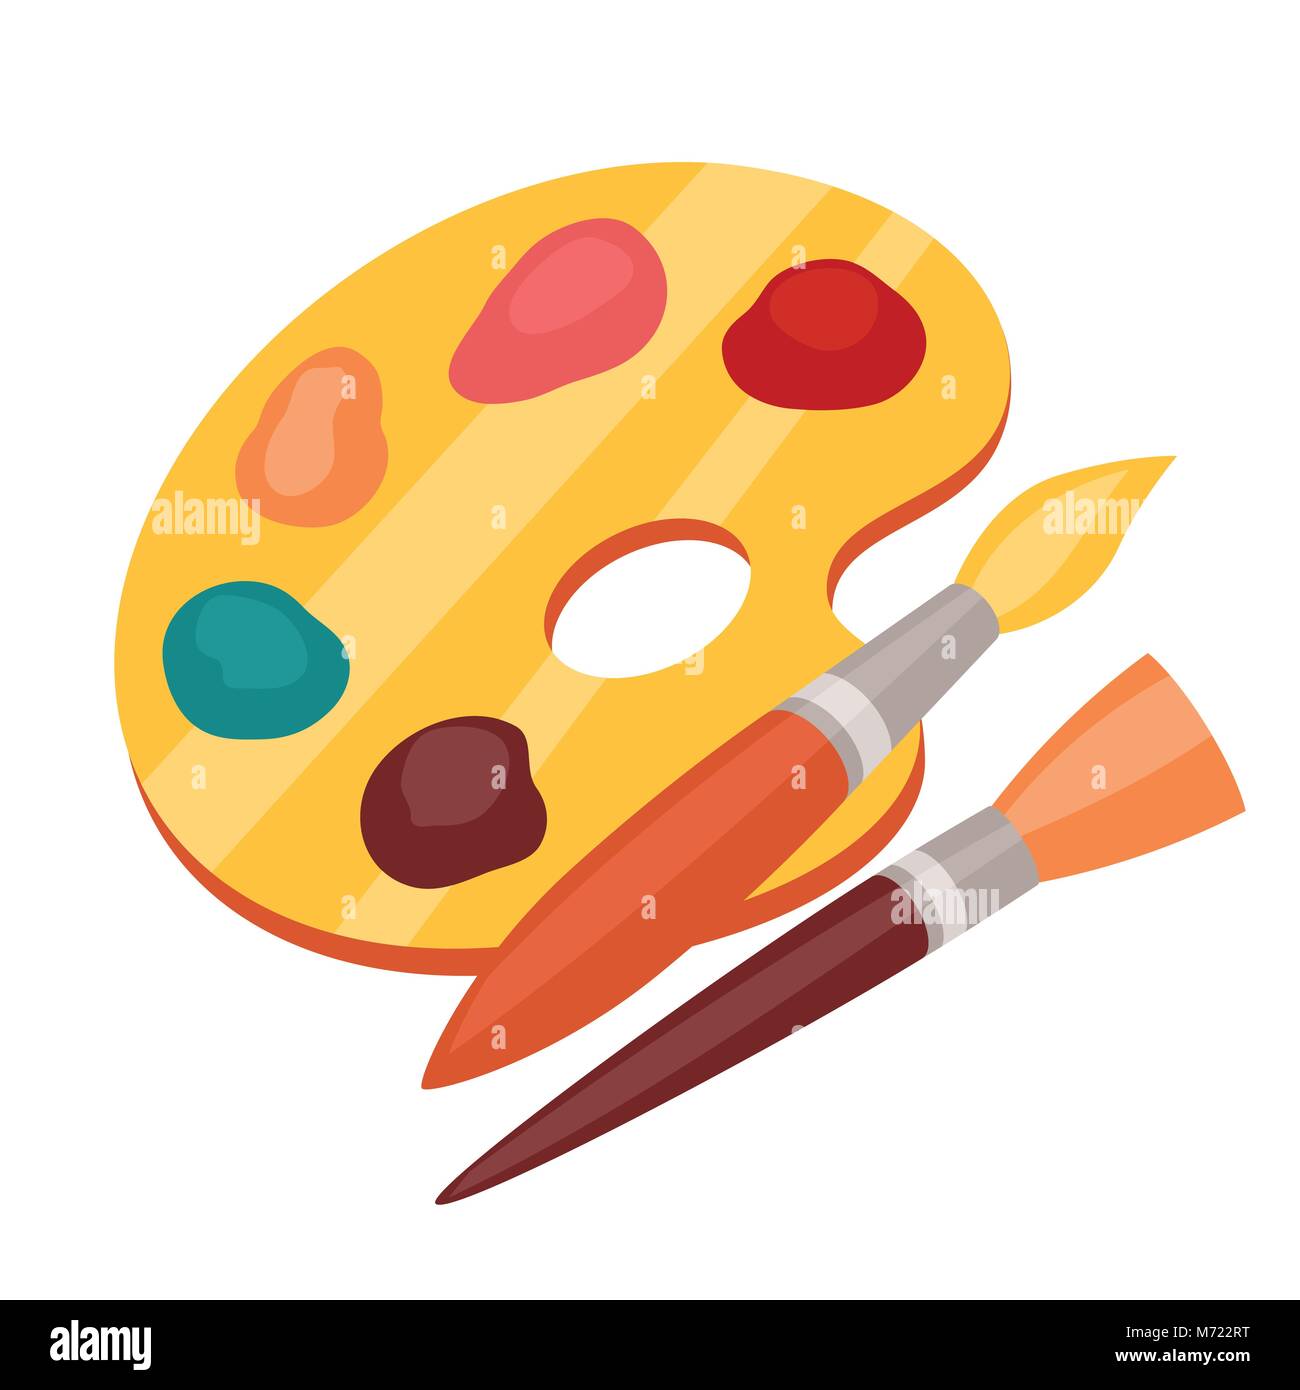 Colorful artist palette Royalty Free Vector Image